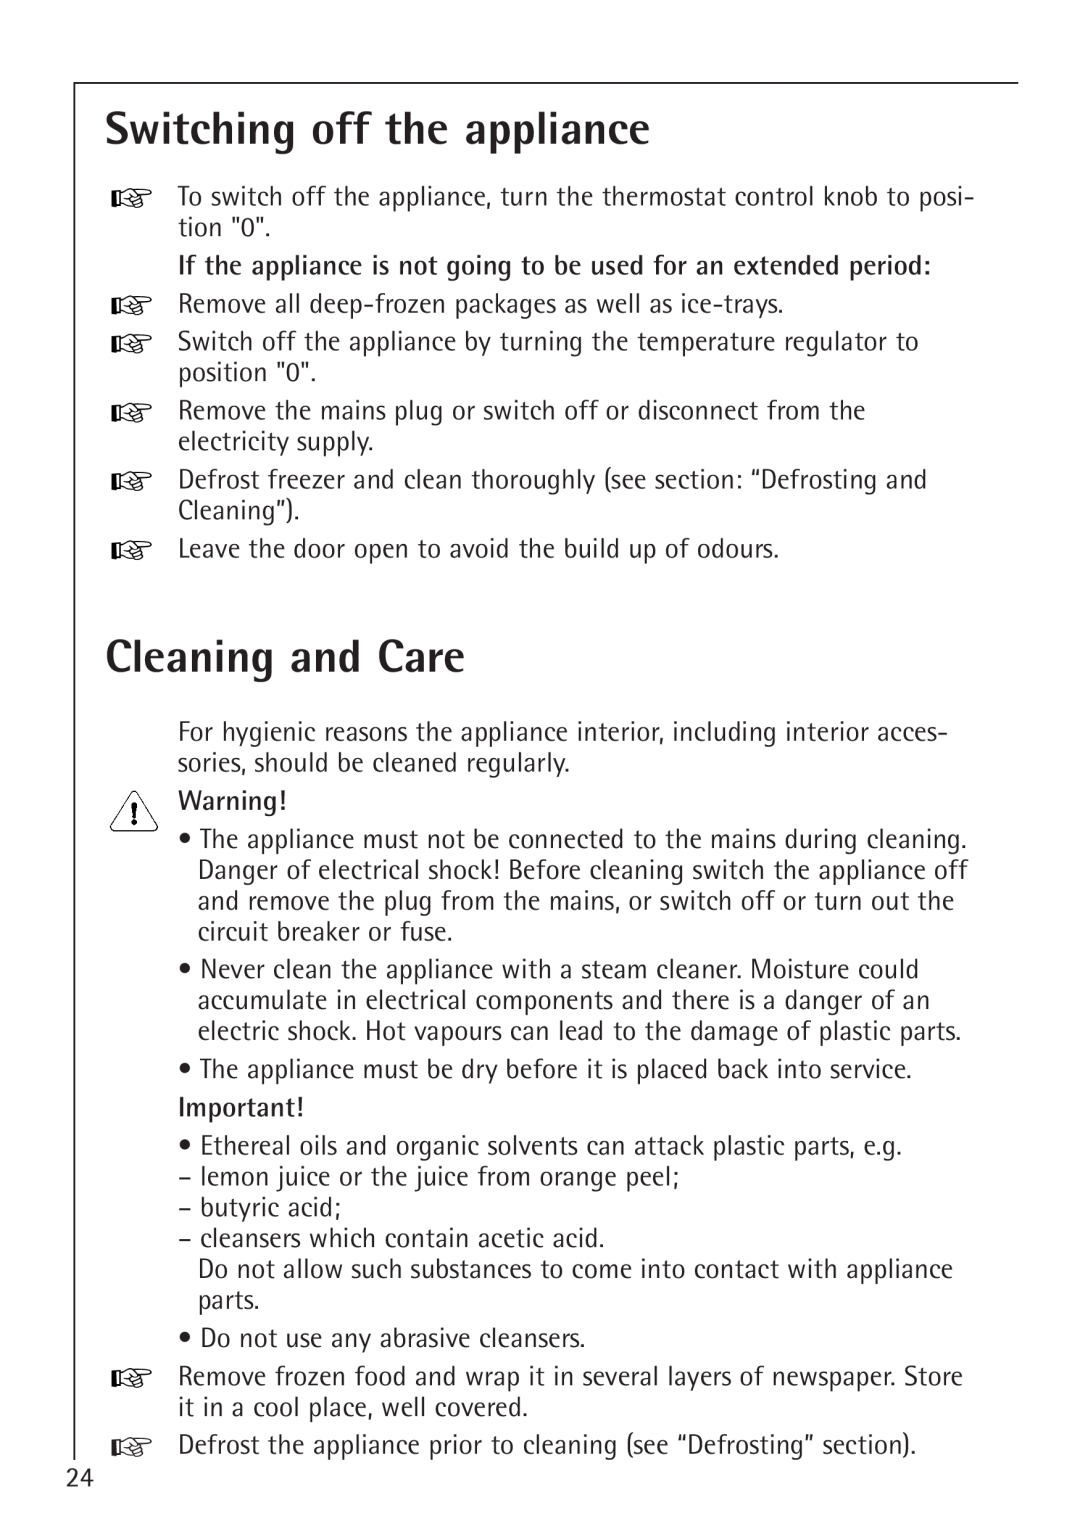 Electrolux 66050i installation instructions Switching off the appliance, Cleaning and Care 